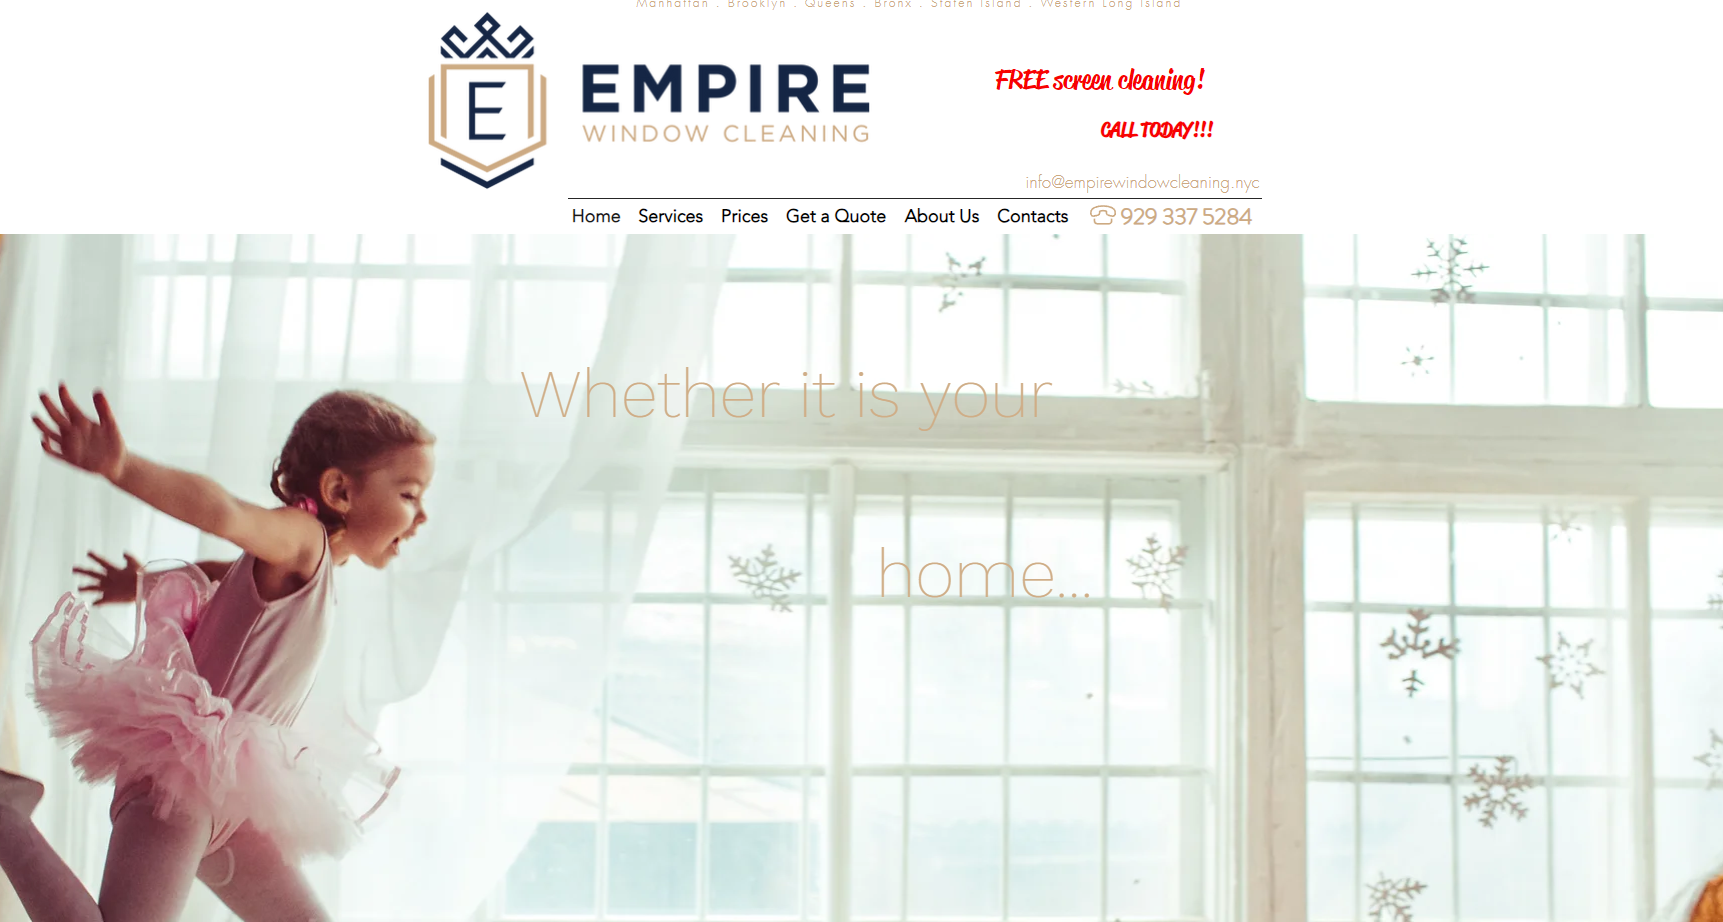 empire window cleaning NYC